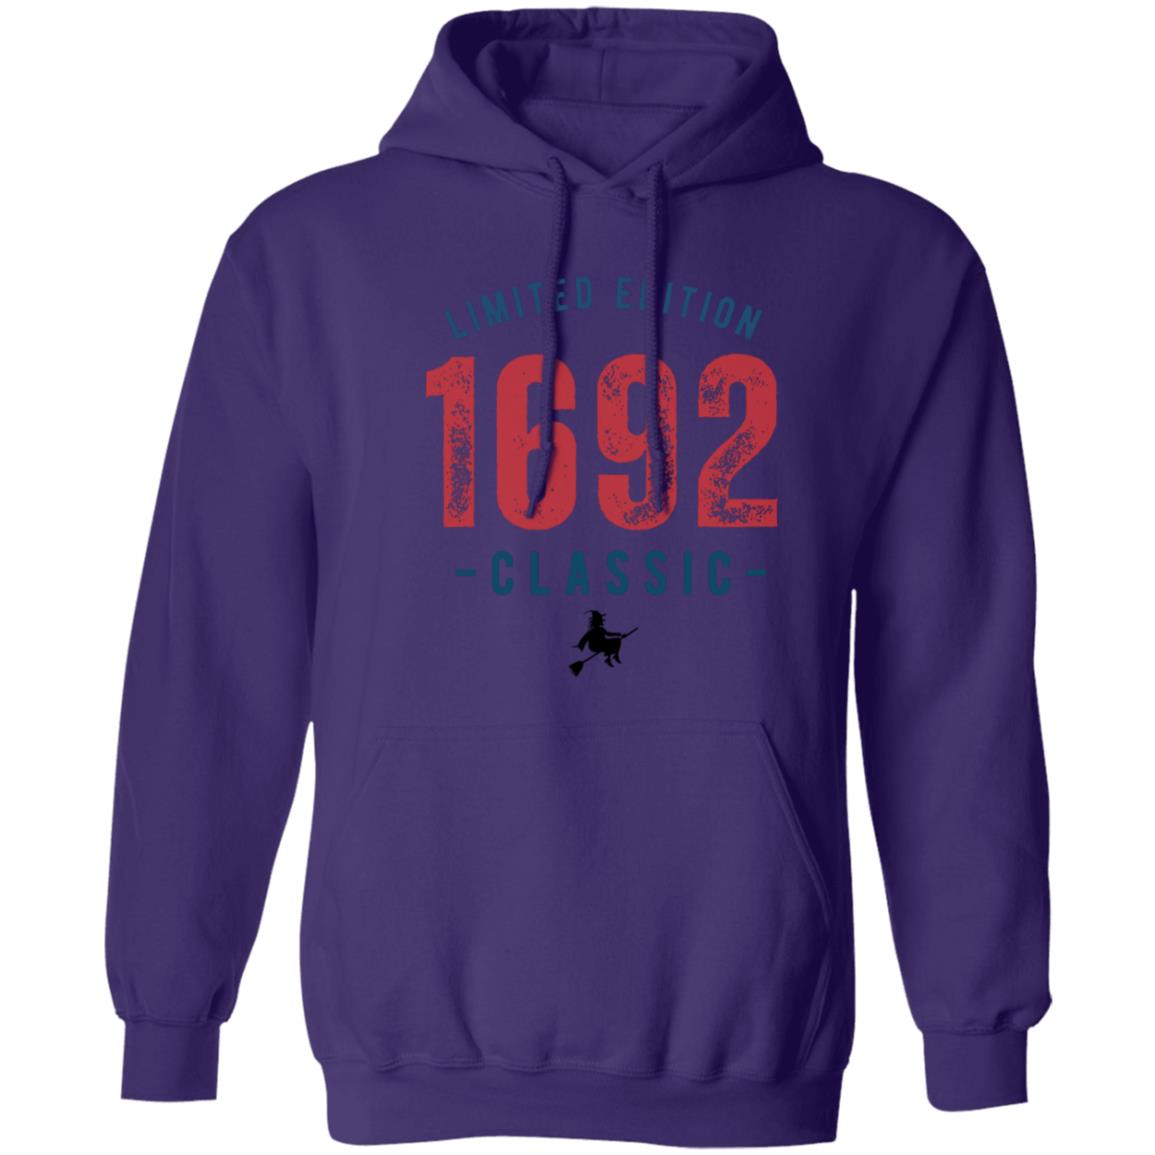 Limited Edition 1692 Classic Witch T Shirt Limited Edition 1692 Classic Halloween Hoodie